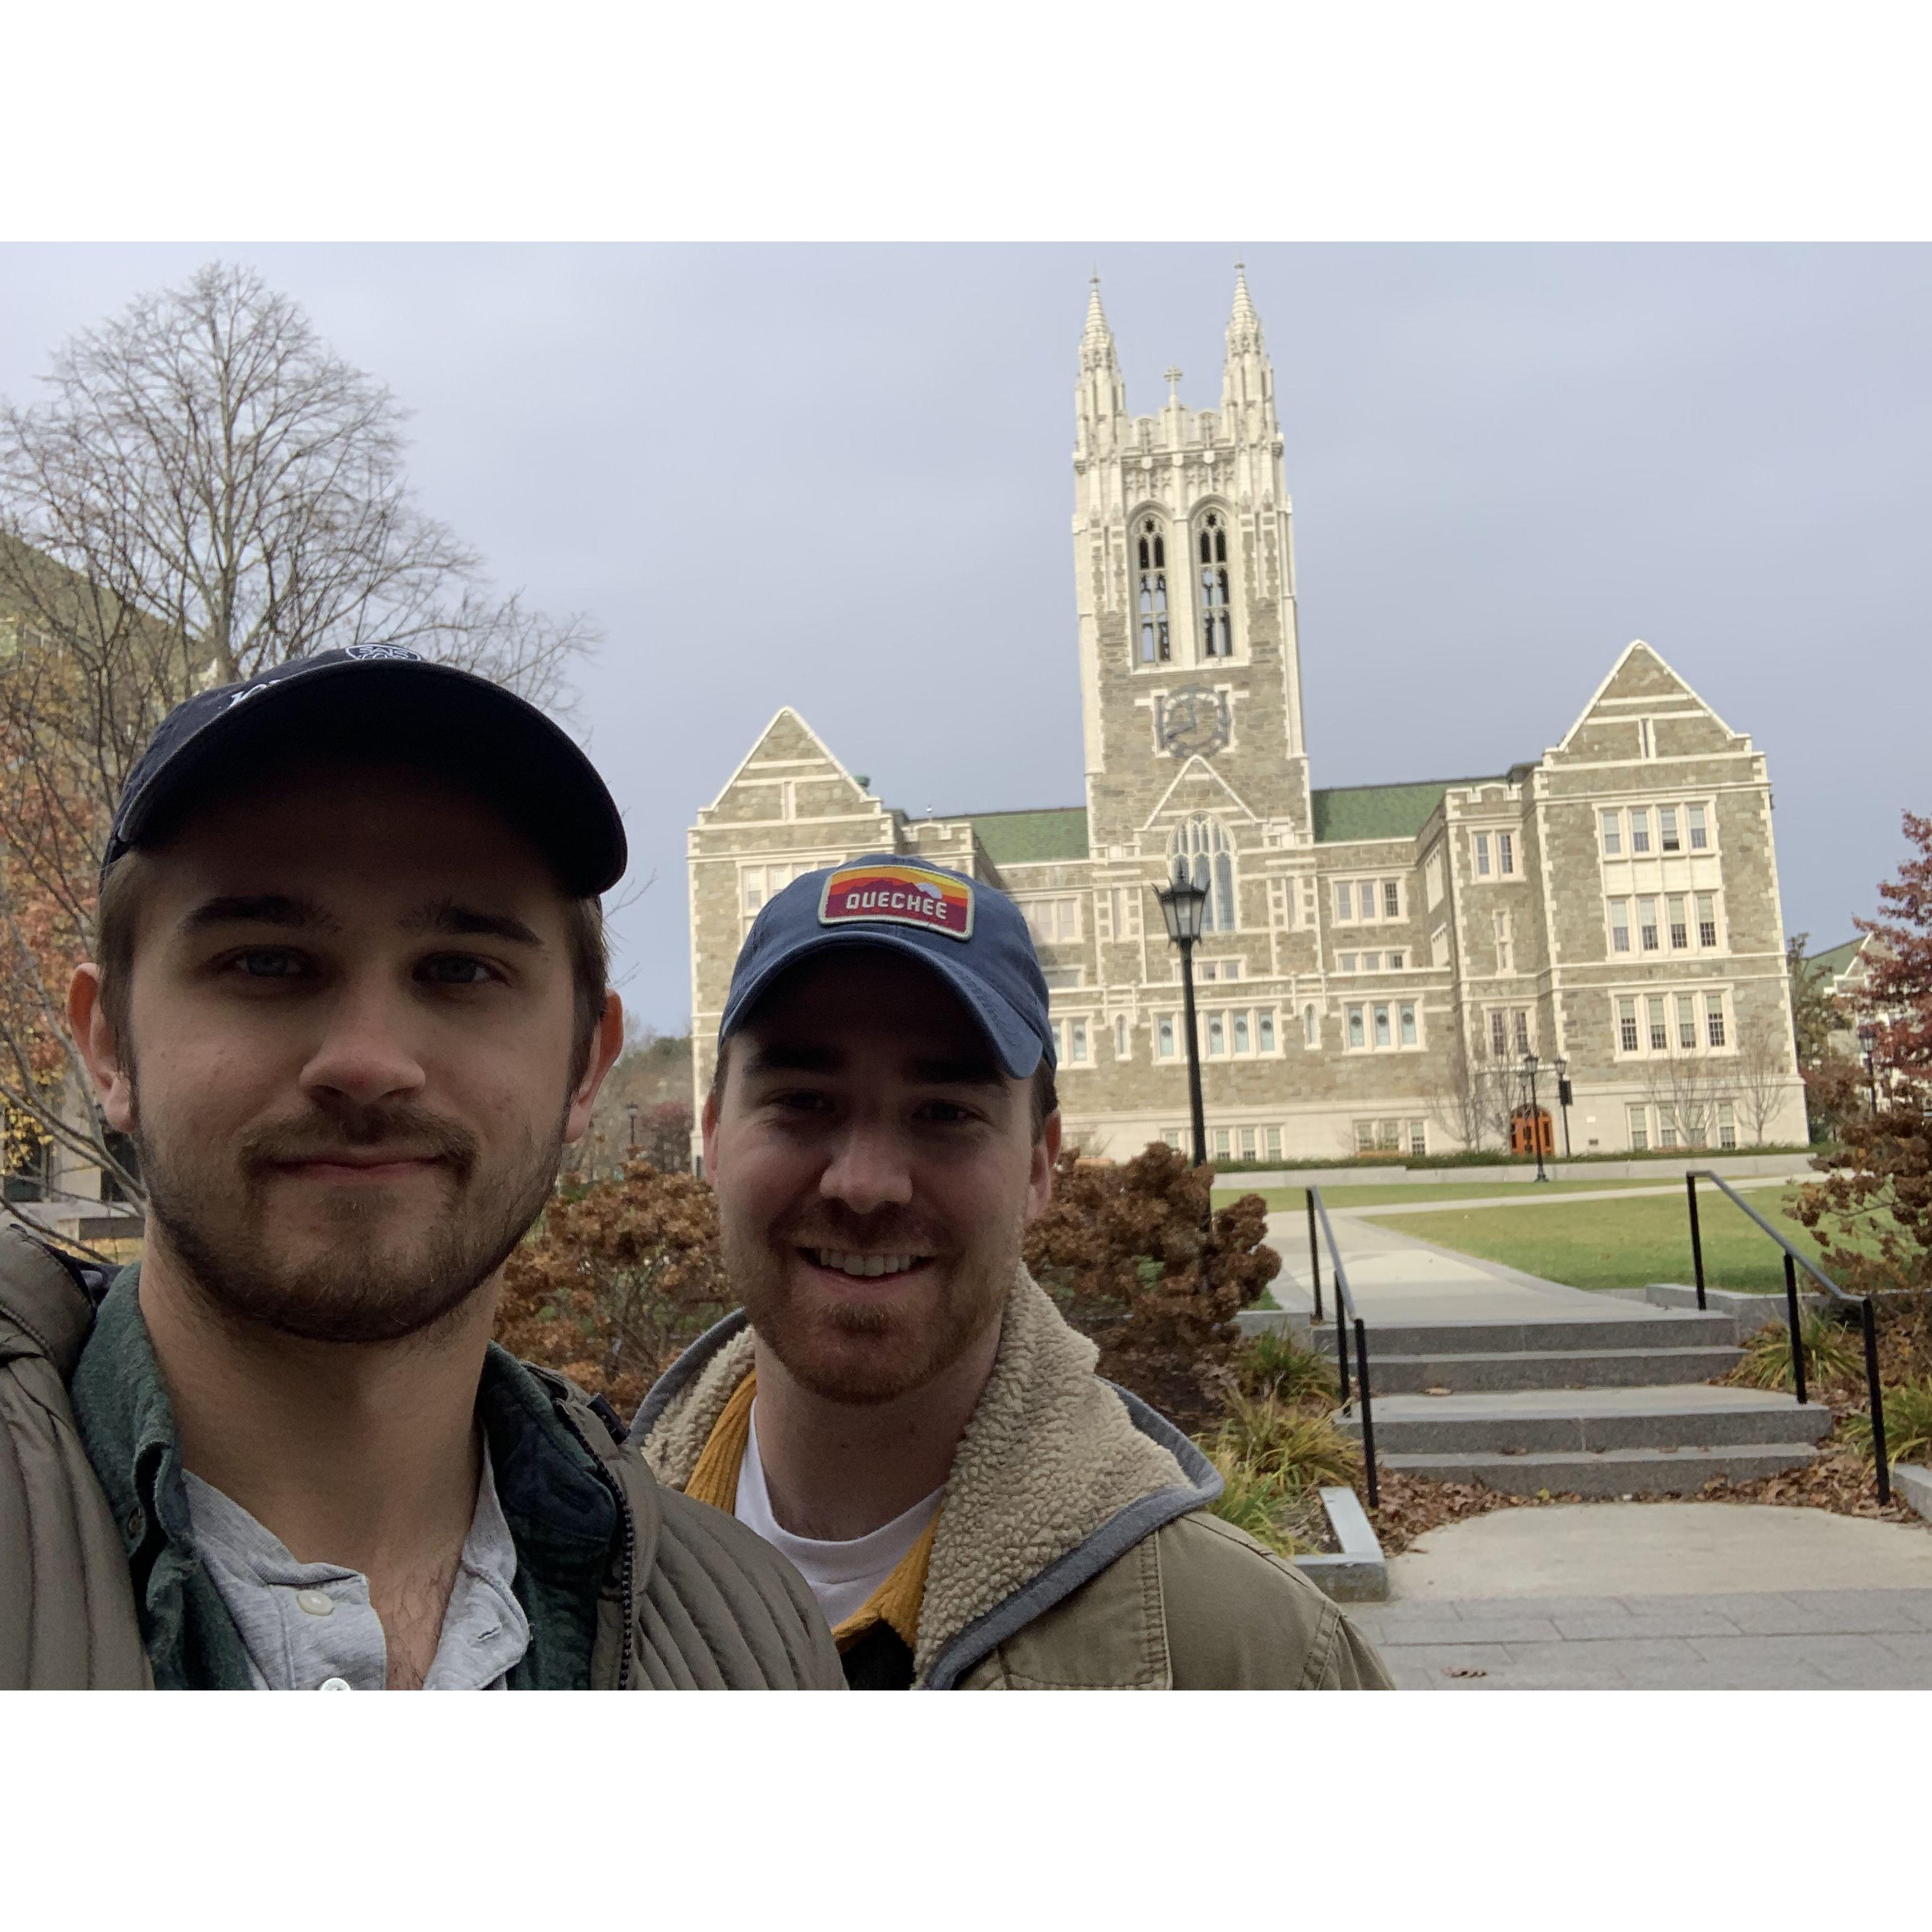 Catching Up: In 2021, Connor and Michael were able to travel together to some of the most meaningful places in their lives, like Charleston; Boston (pictured); Quechee, VT; NYC; and Long Island.